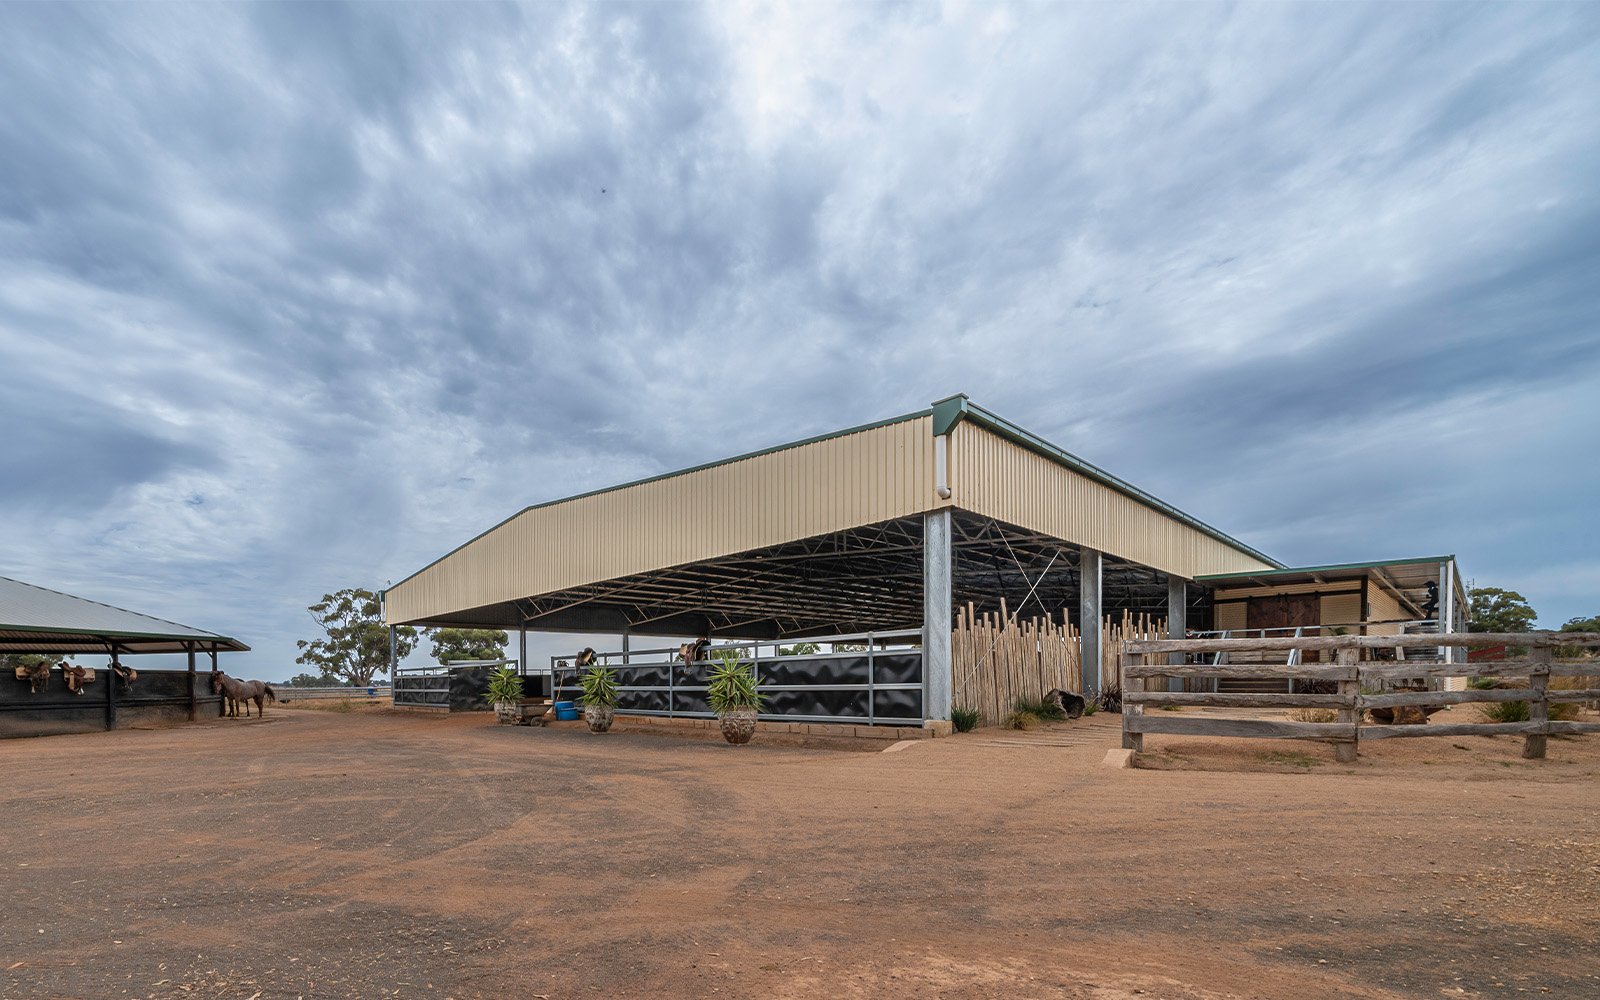 Bruce ODell western riding arena